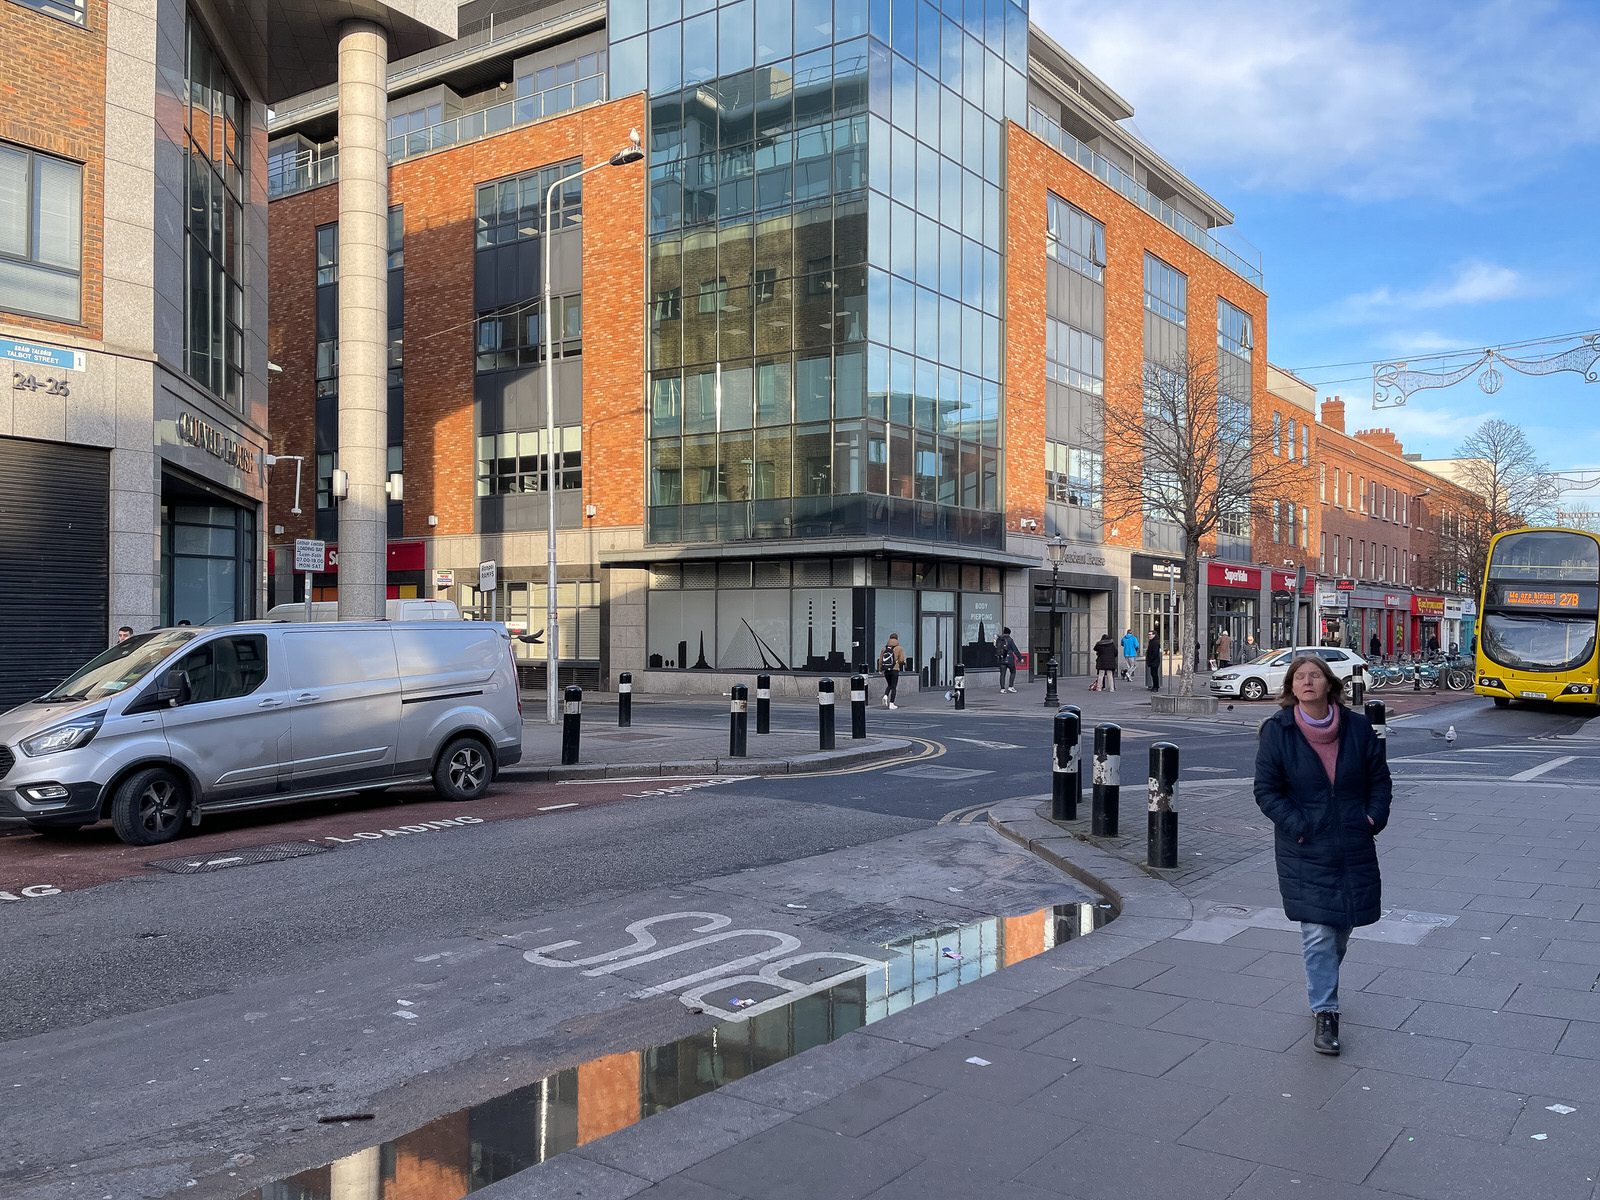 TALBOT STREET [FAILS TO MEET ITS POTENTIAL AS A MAJOR SHOPPING STREET]-225735-1